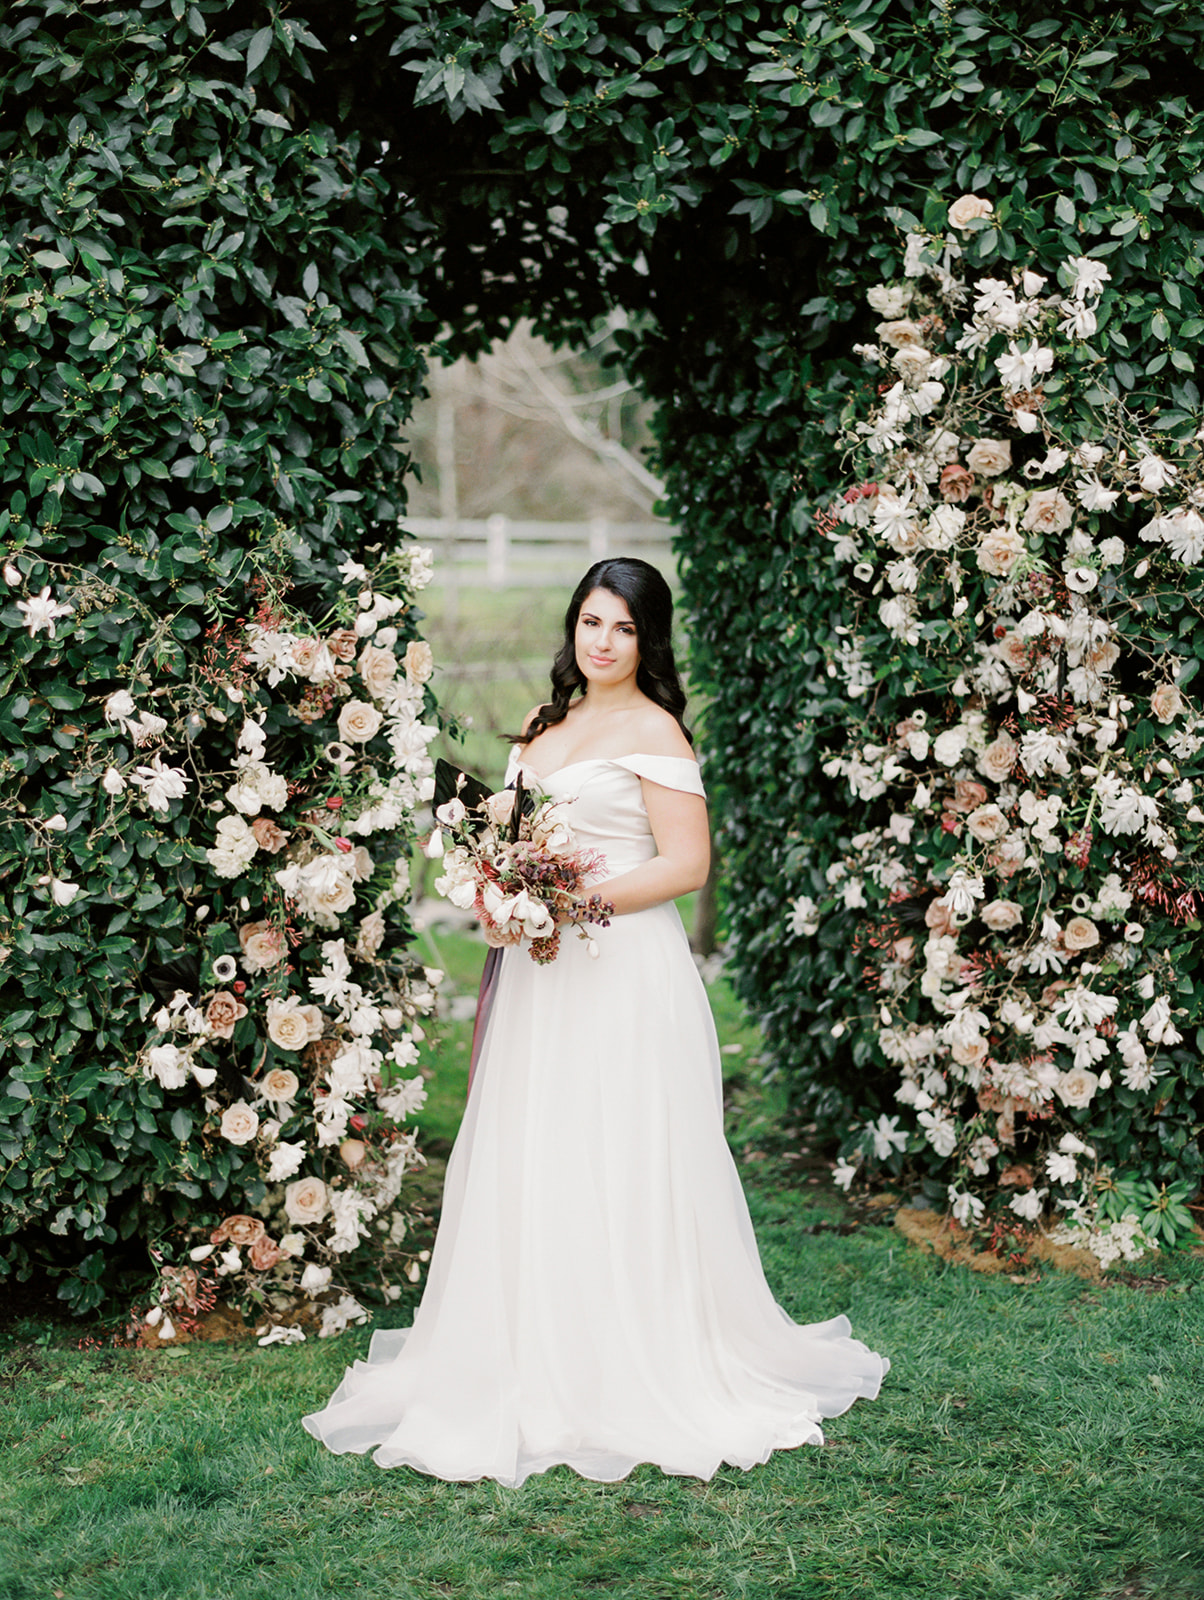 the bride standing in front of a floral arch installation in Chateau Lill, holding a bouquet